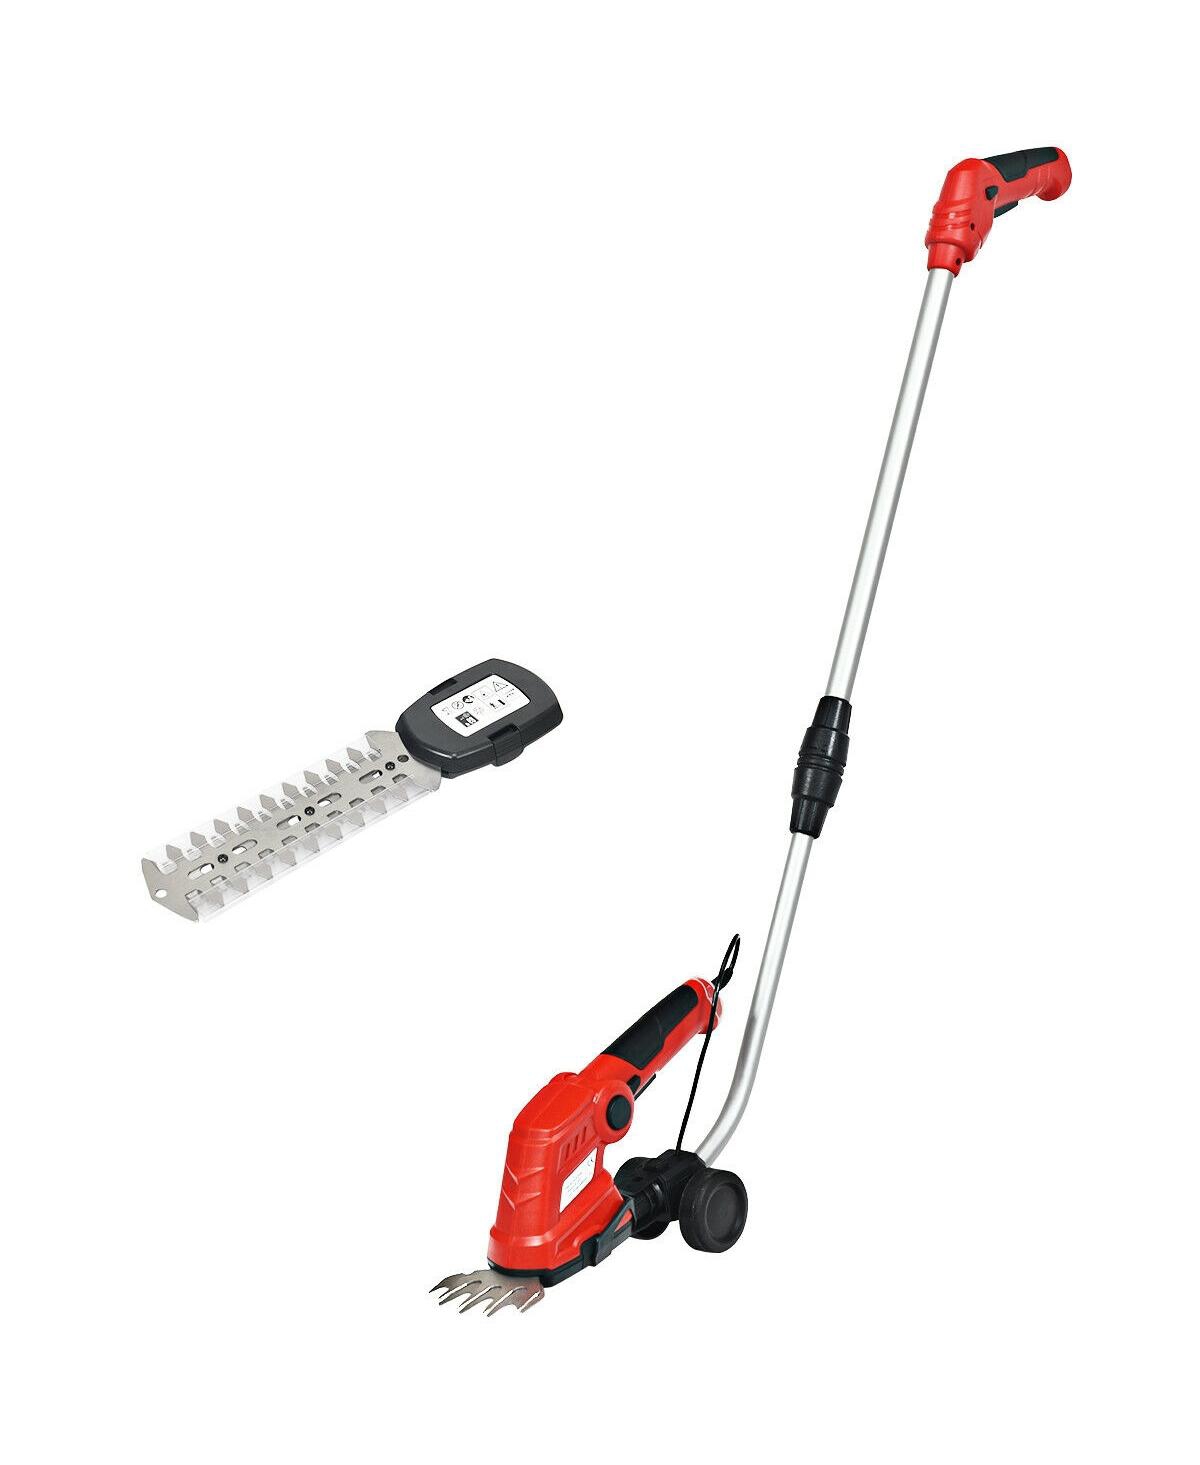 7.2V Cordless Grass Shear with Extension Handle and Rechargeable Battery - Open Miscellaneous